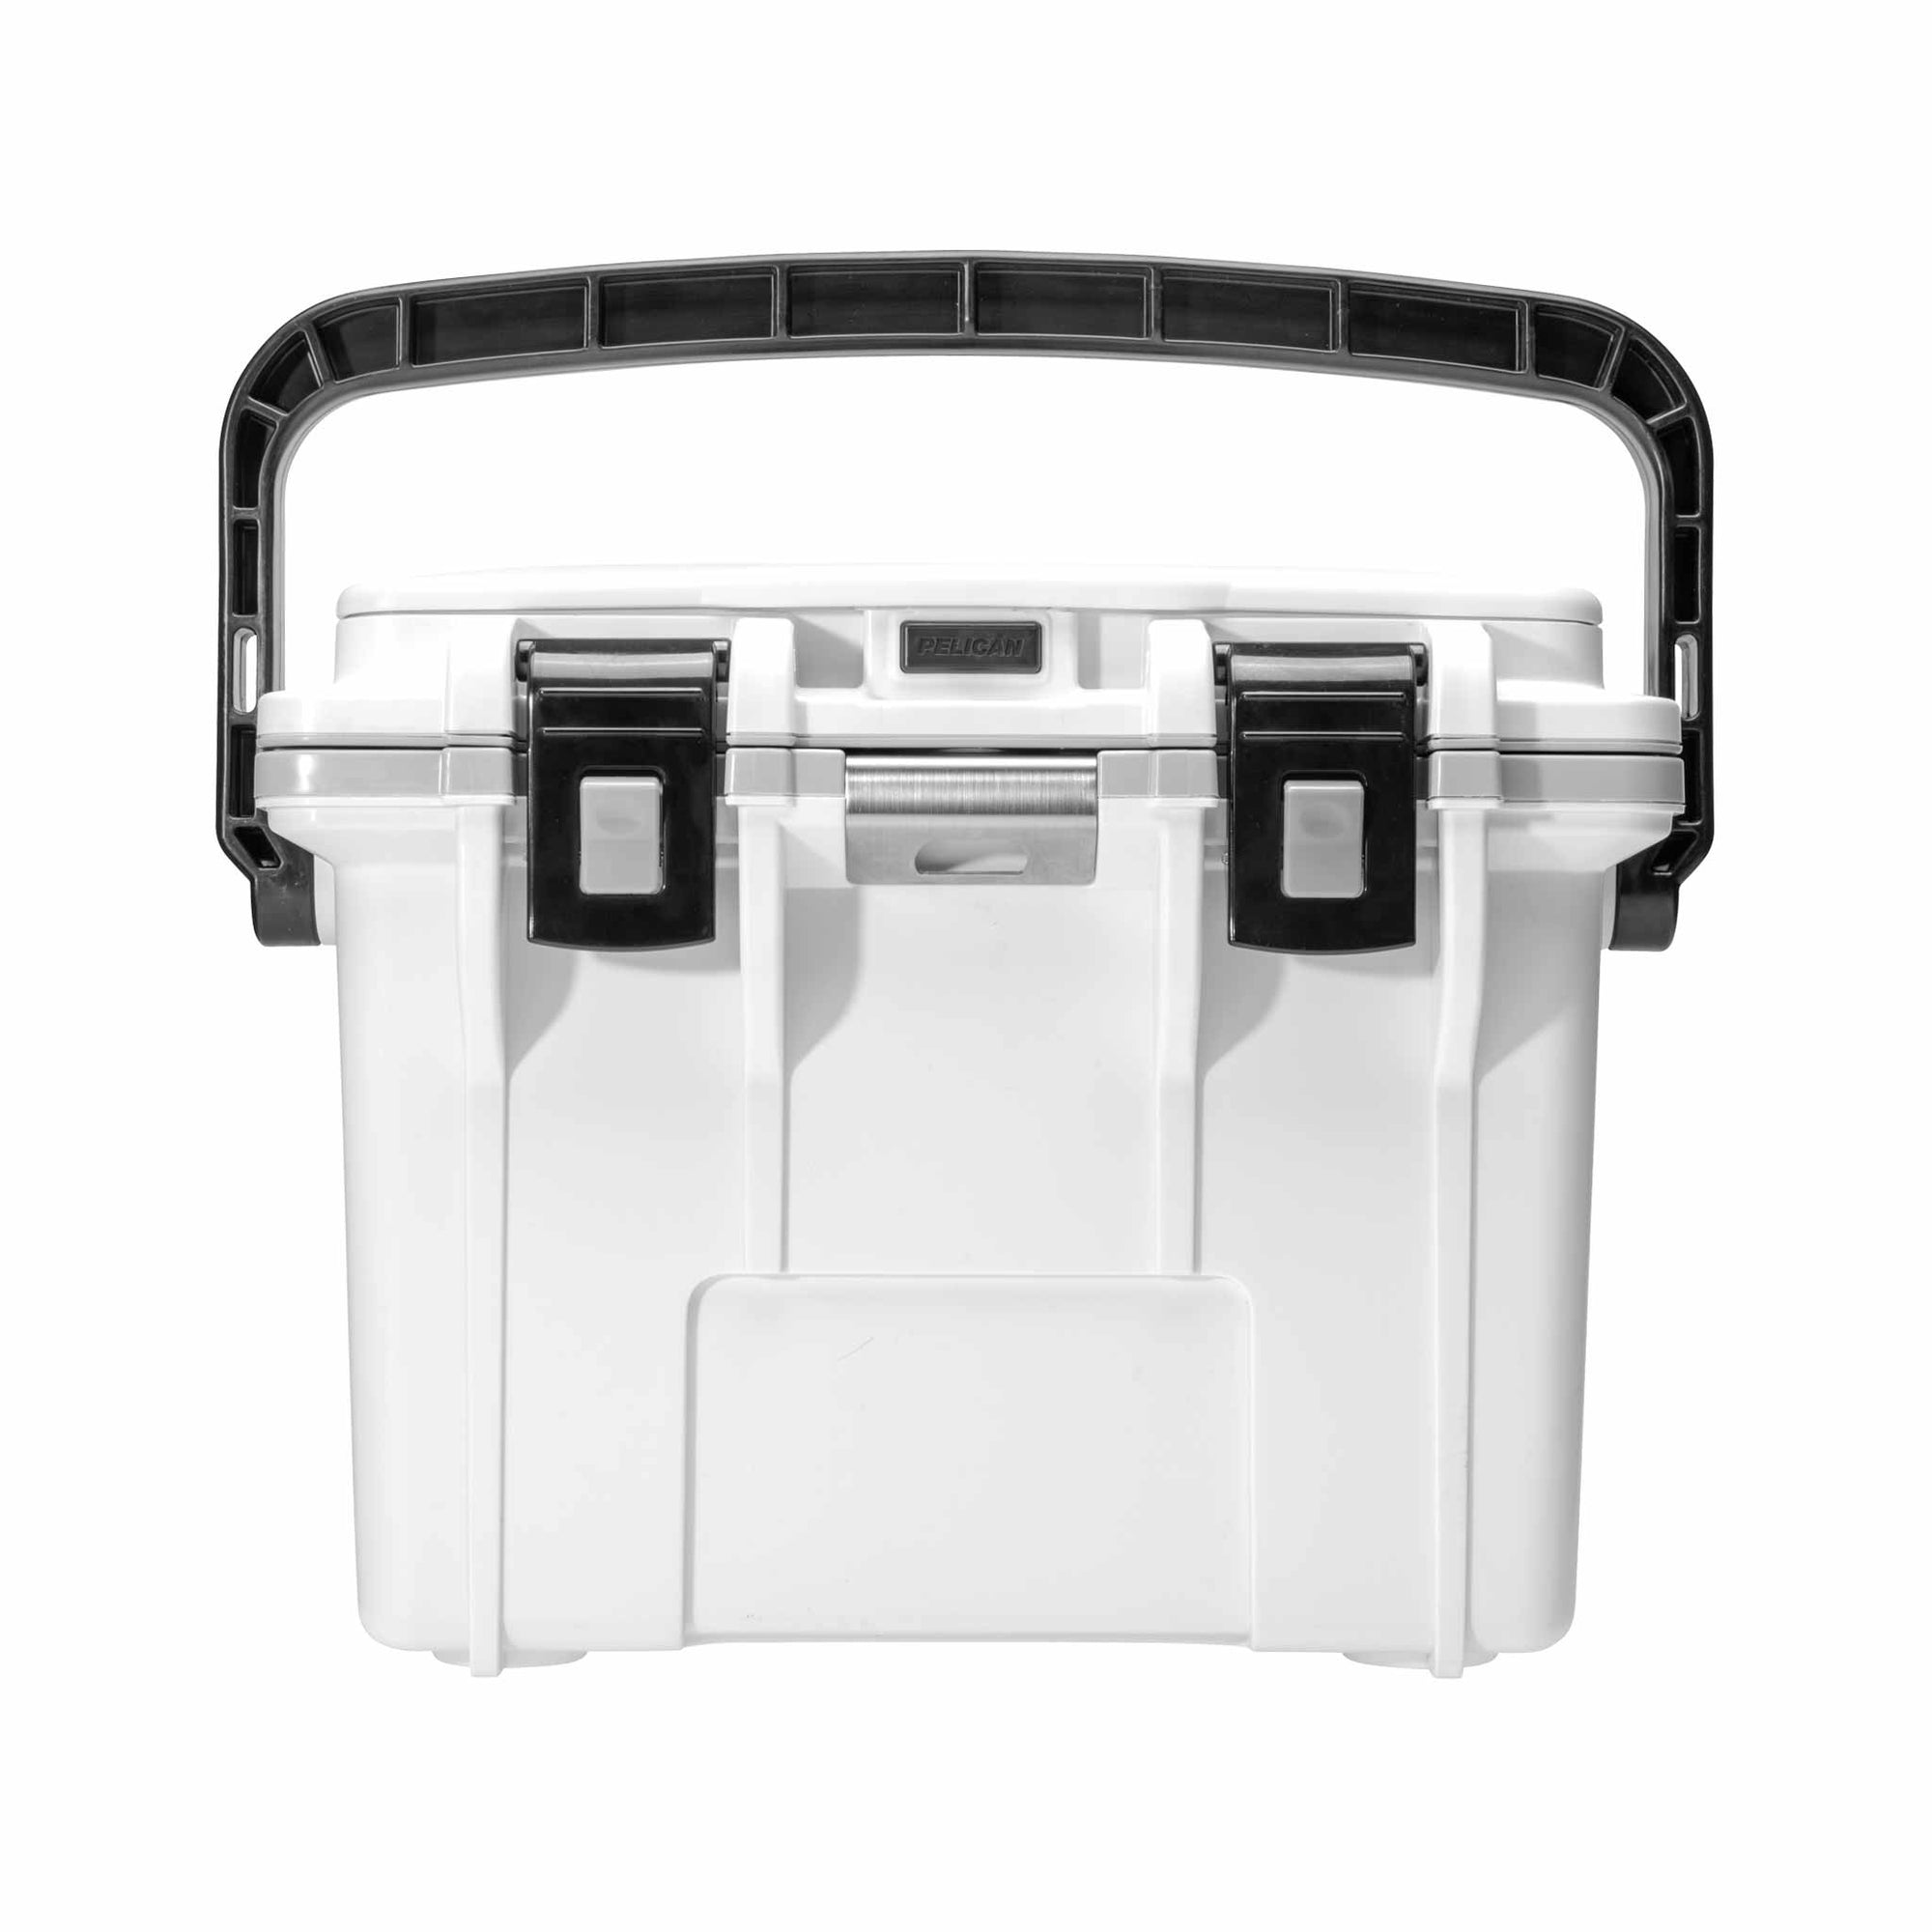 14QT Personal Pelican Cooler in White/Grey